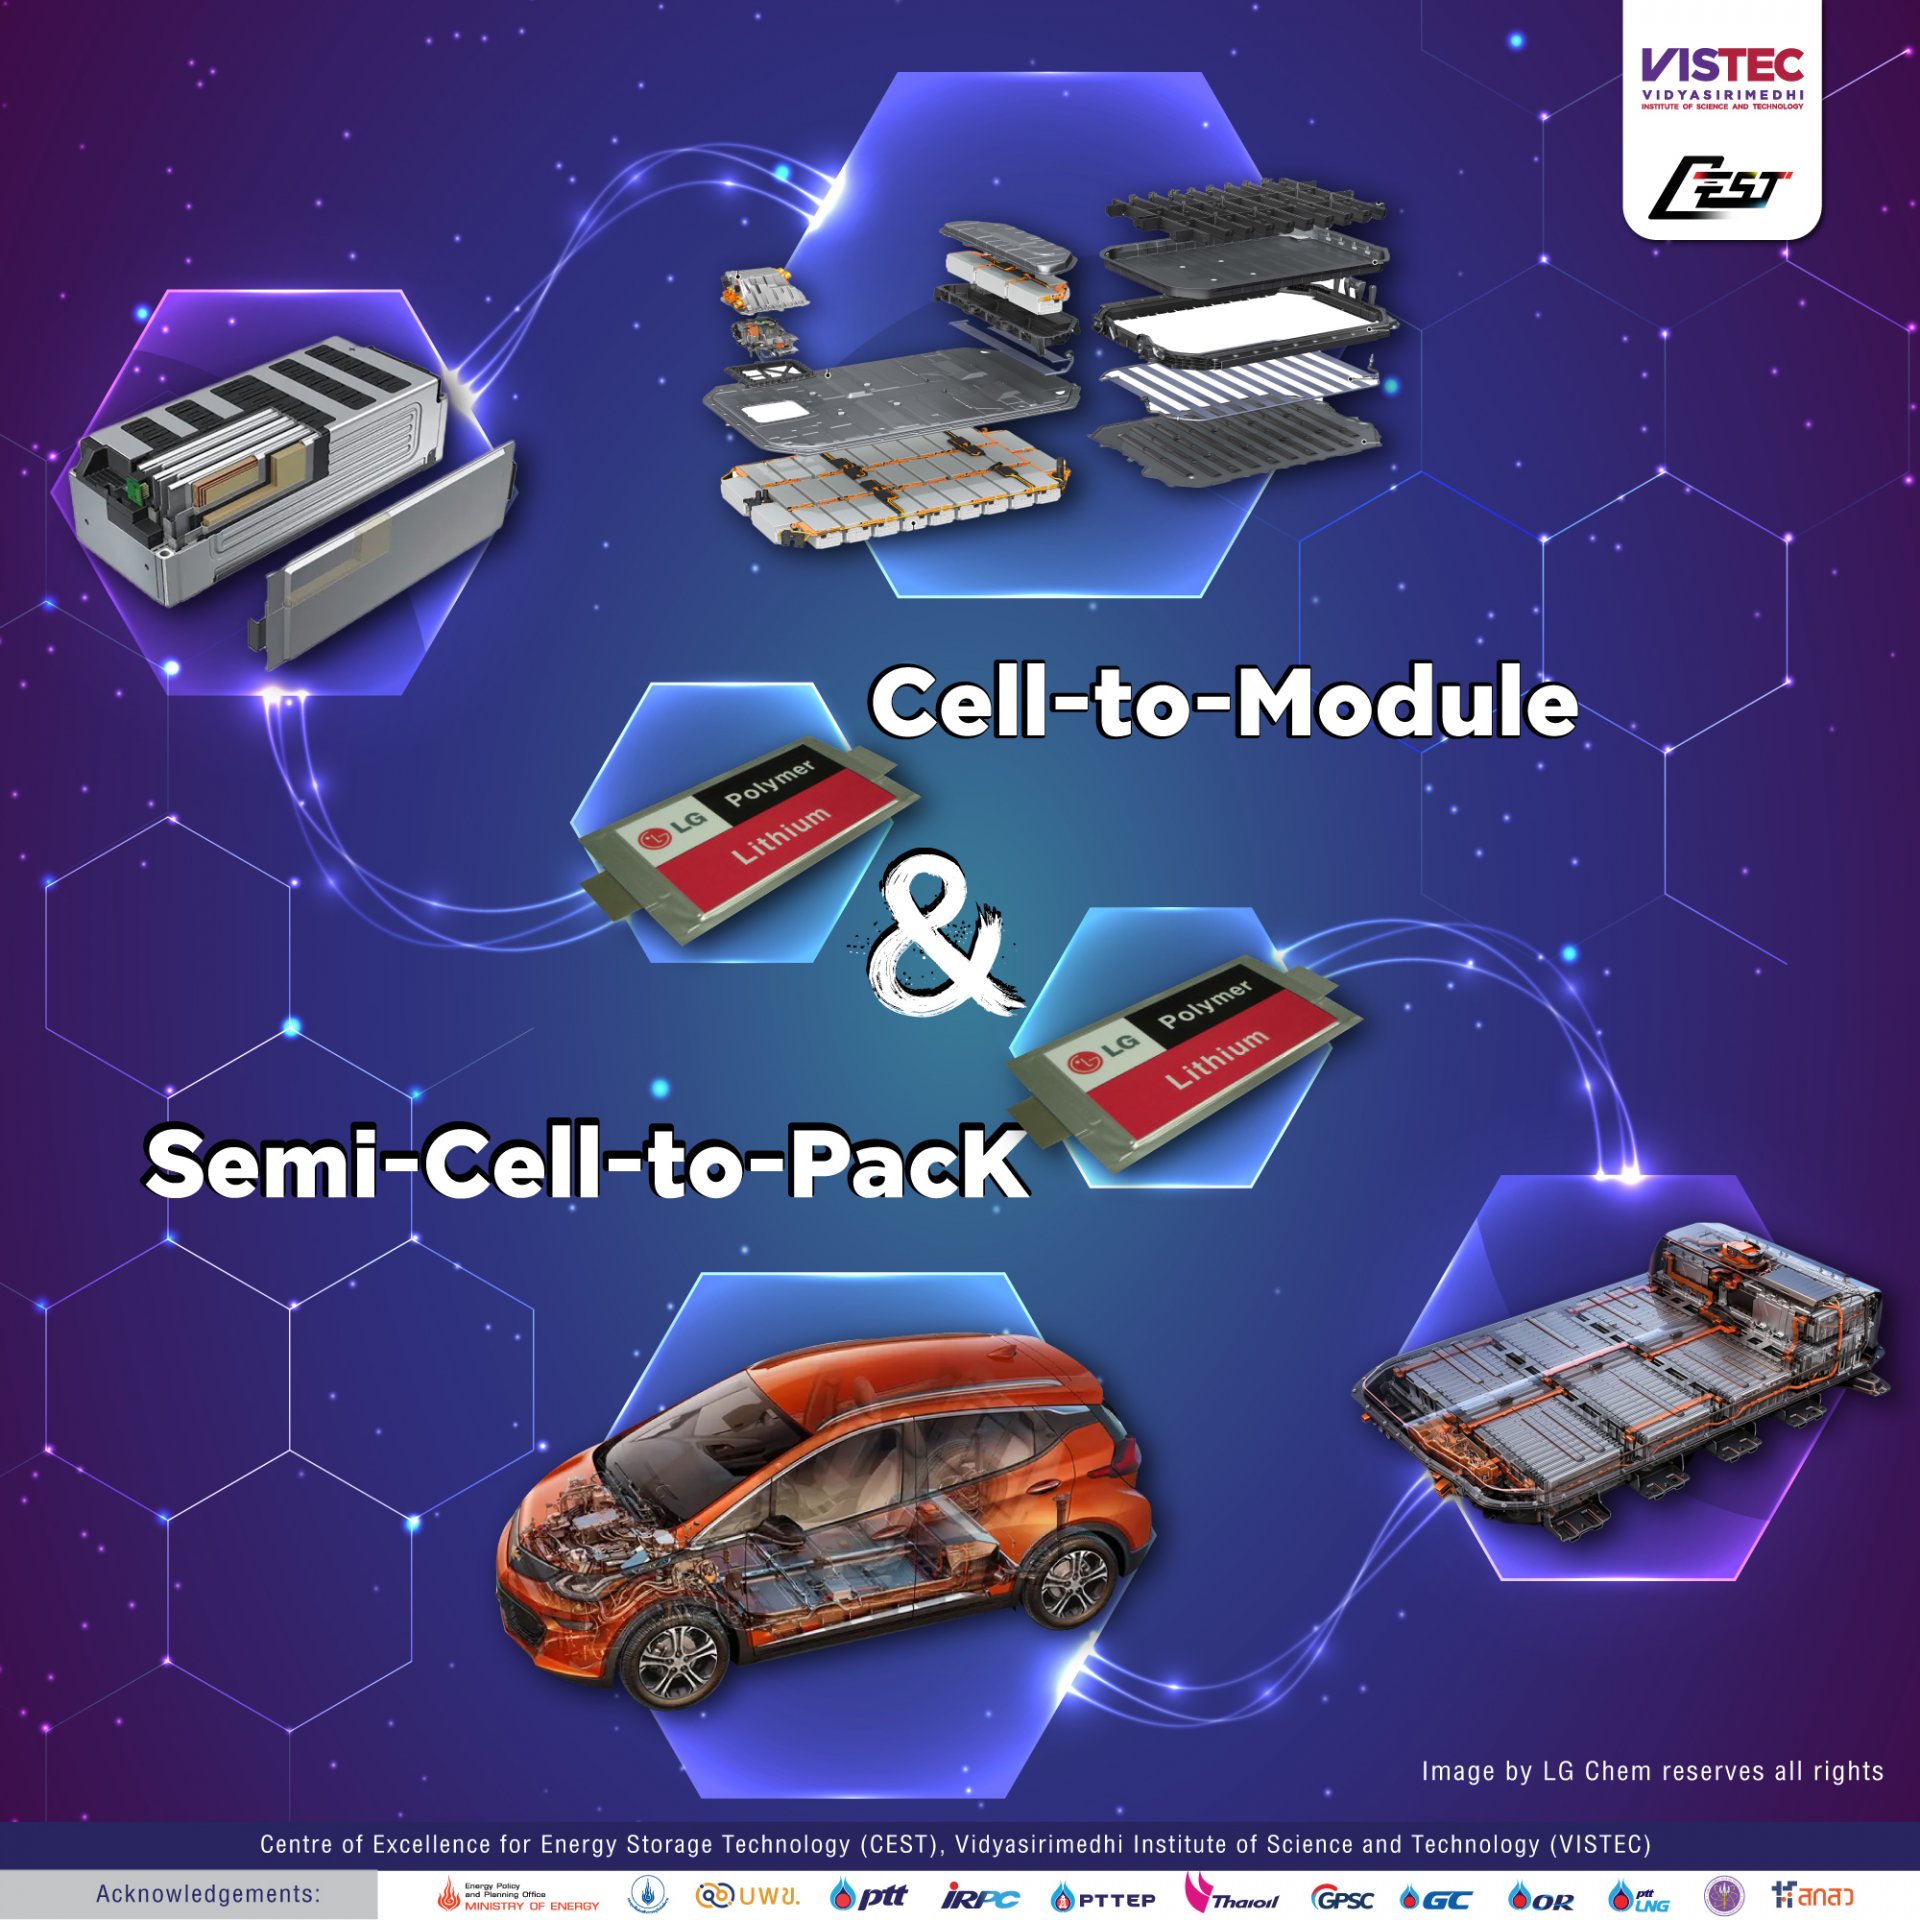 Cell-to-Module and Semi-Cell-to-Pack Image by LG Chem reserves all rights